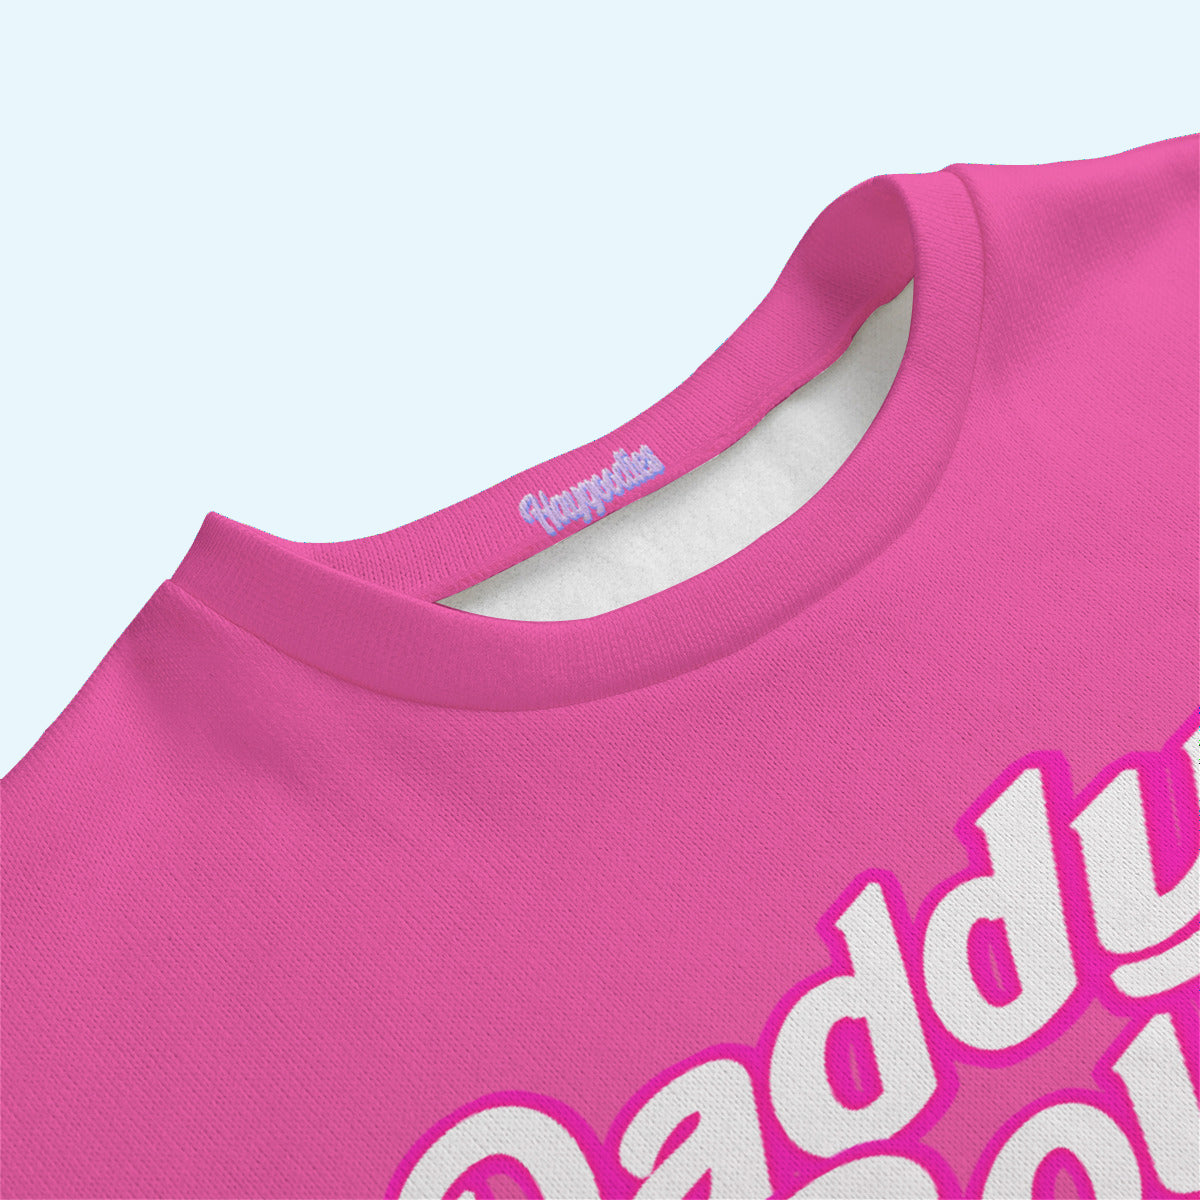 Daddy's Boy Pink Unisex Knitted Fleece Sweater-S to 6XL